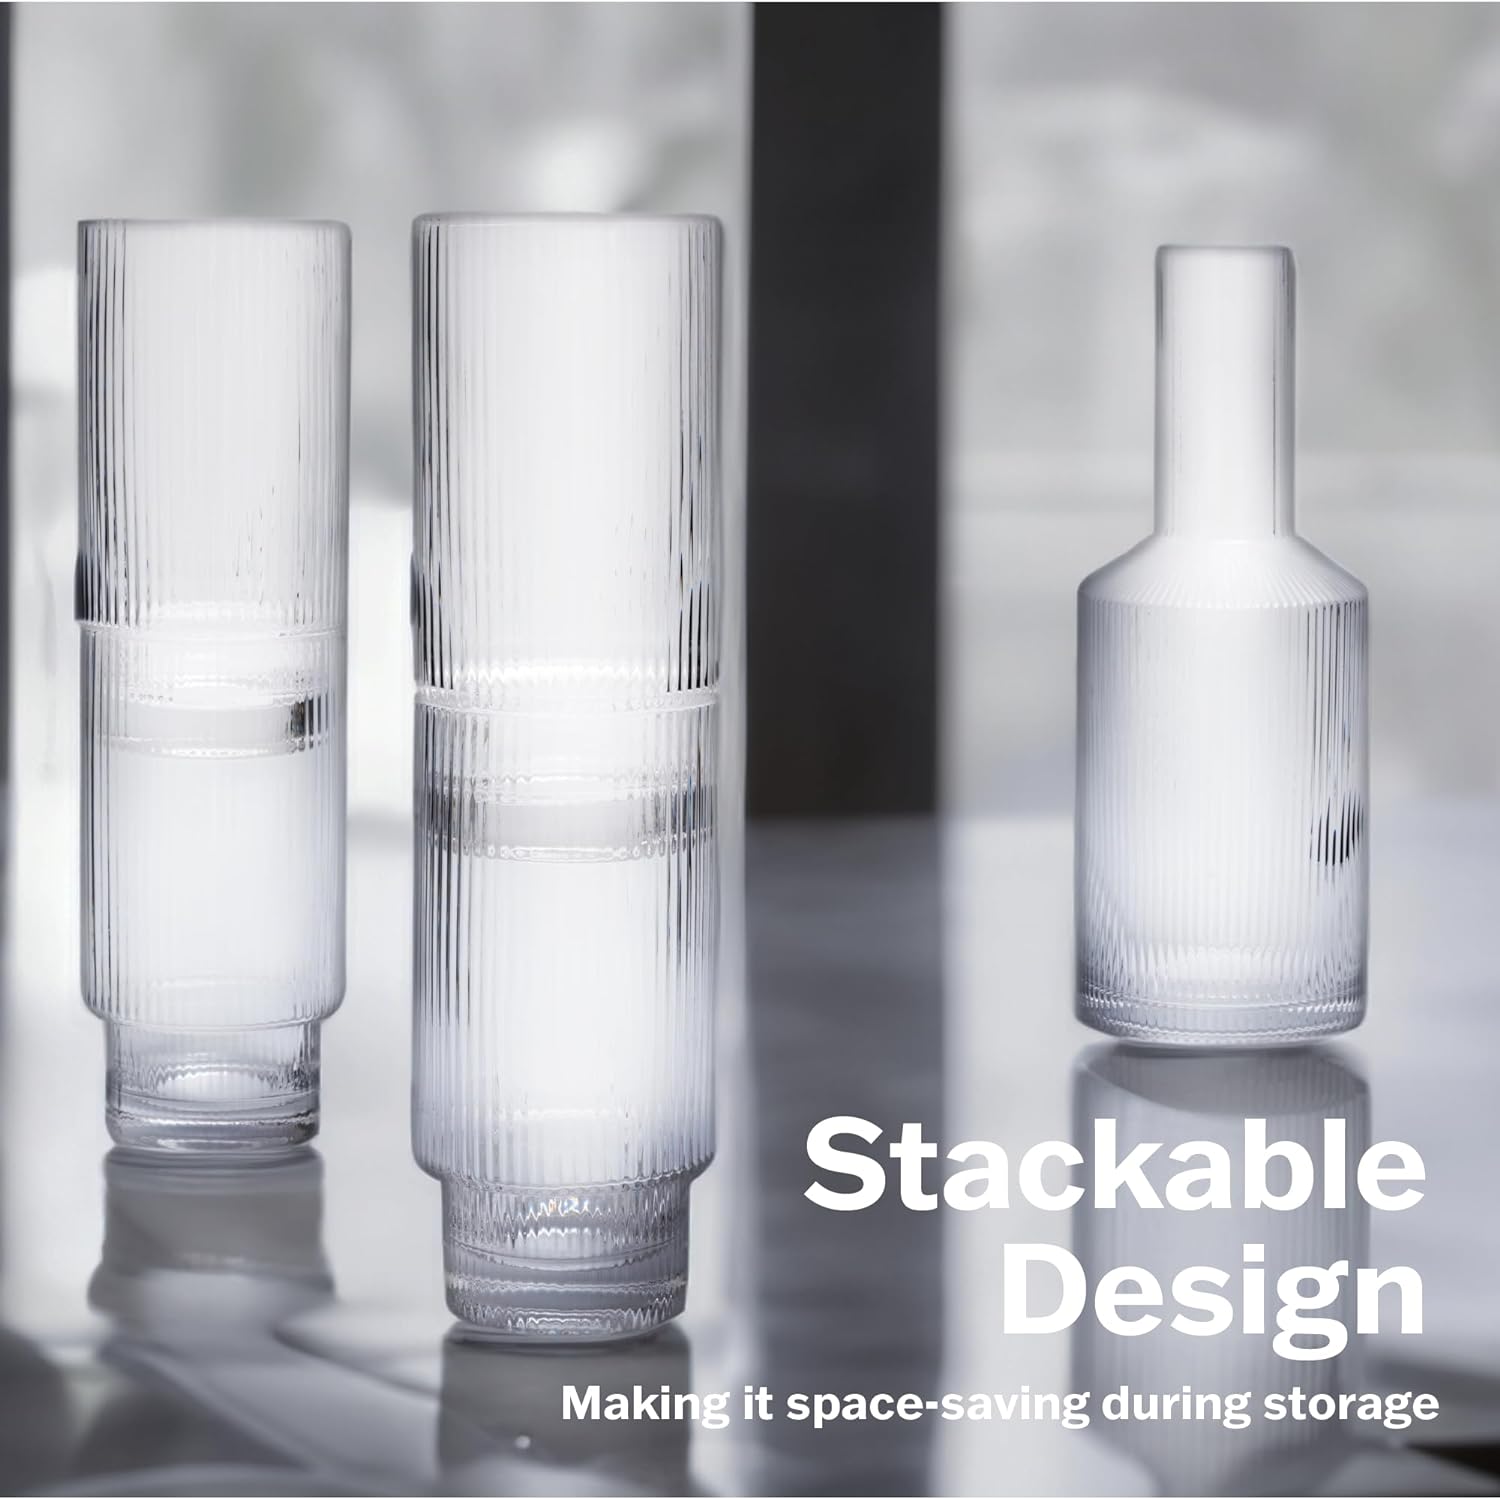 a group of clear glasses on a table with text: 'Stackable Design Making it space-saving during storage'